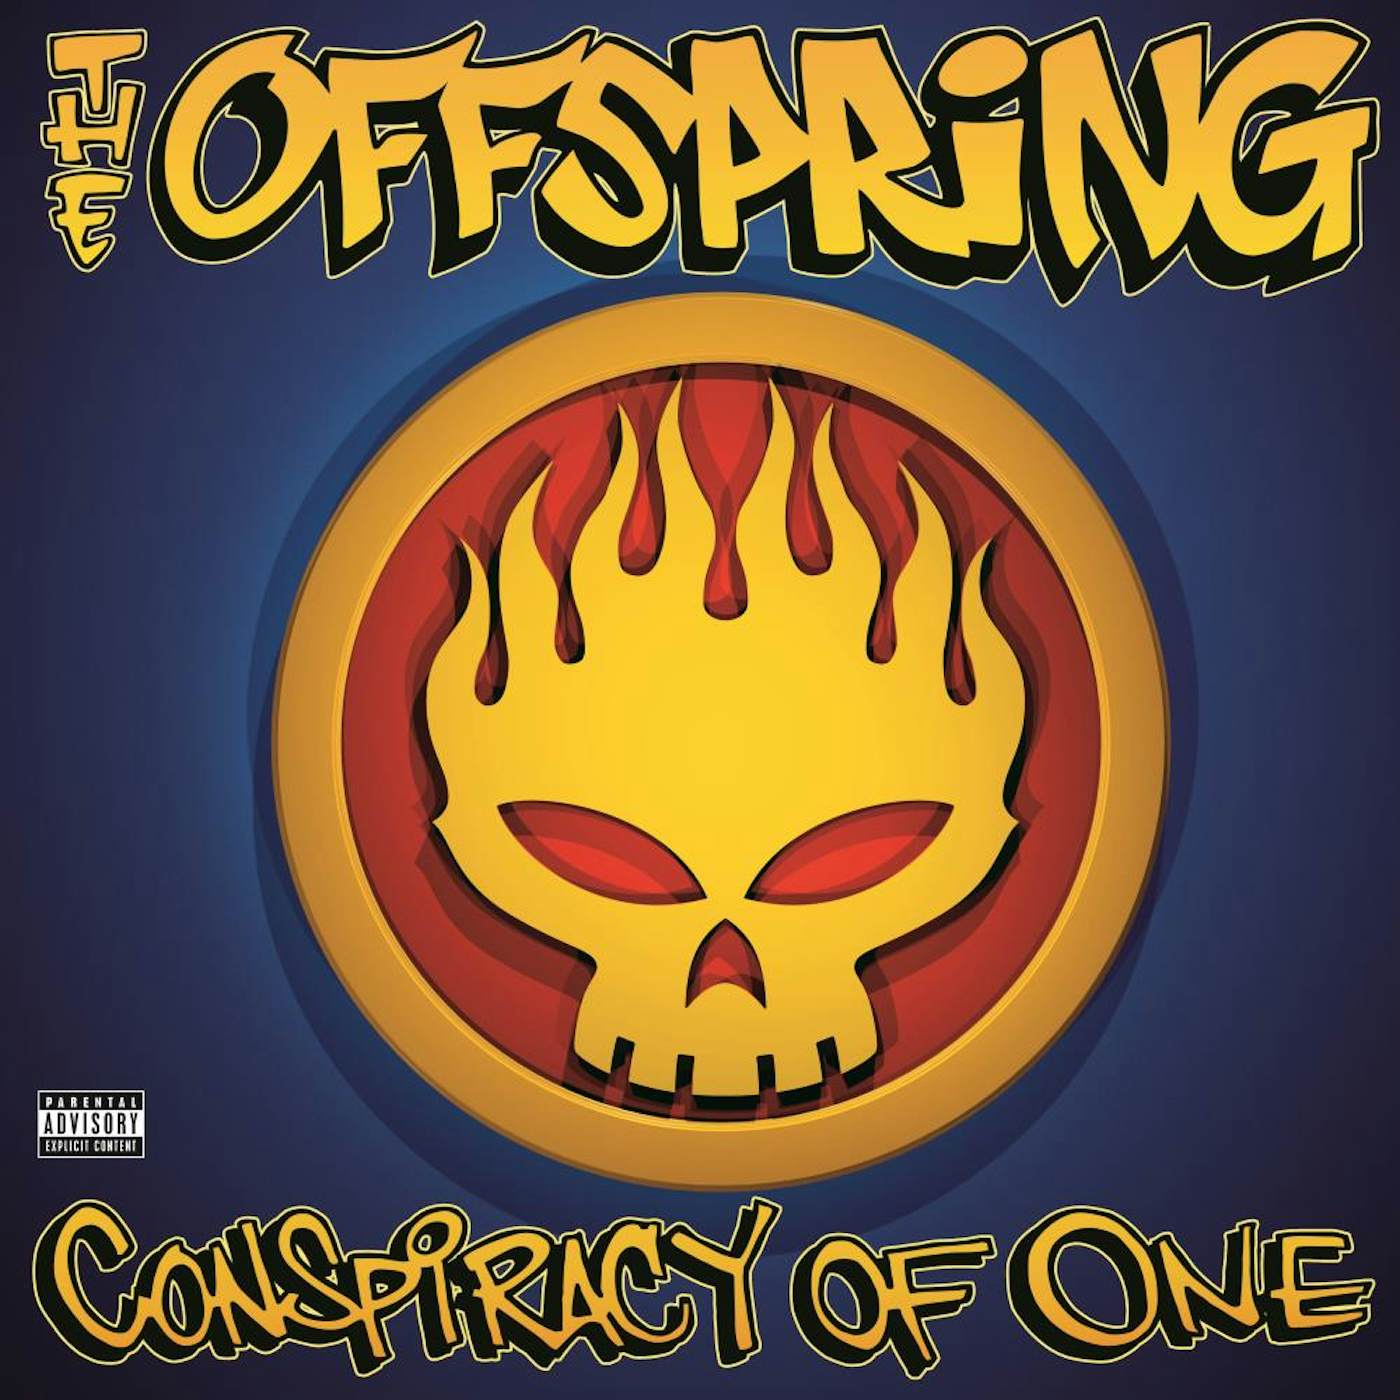 The Offspring Conspiracy Of One Vinyl Record